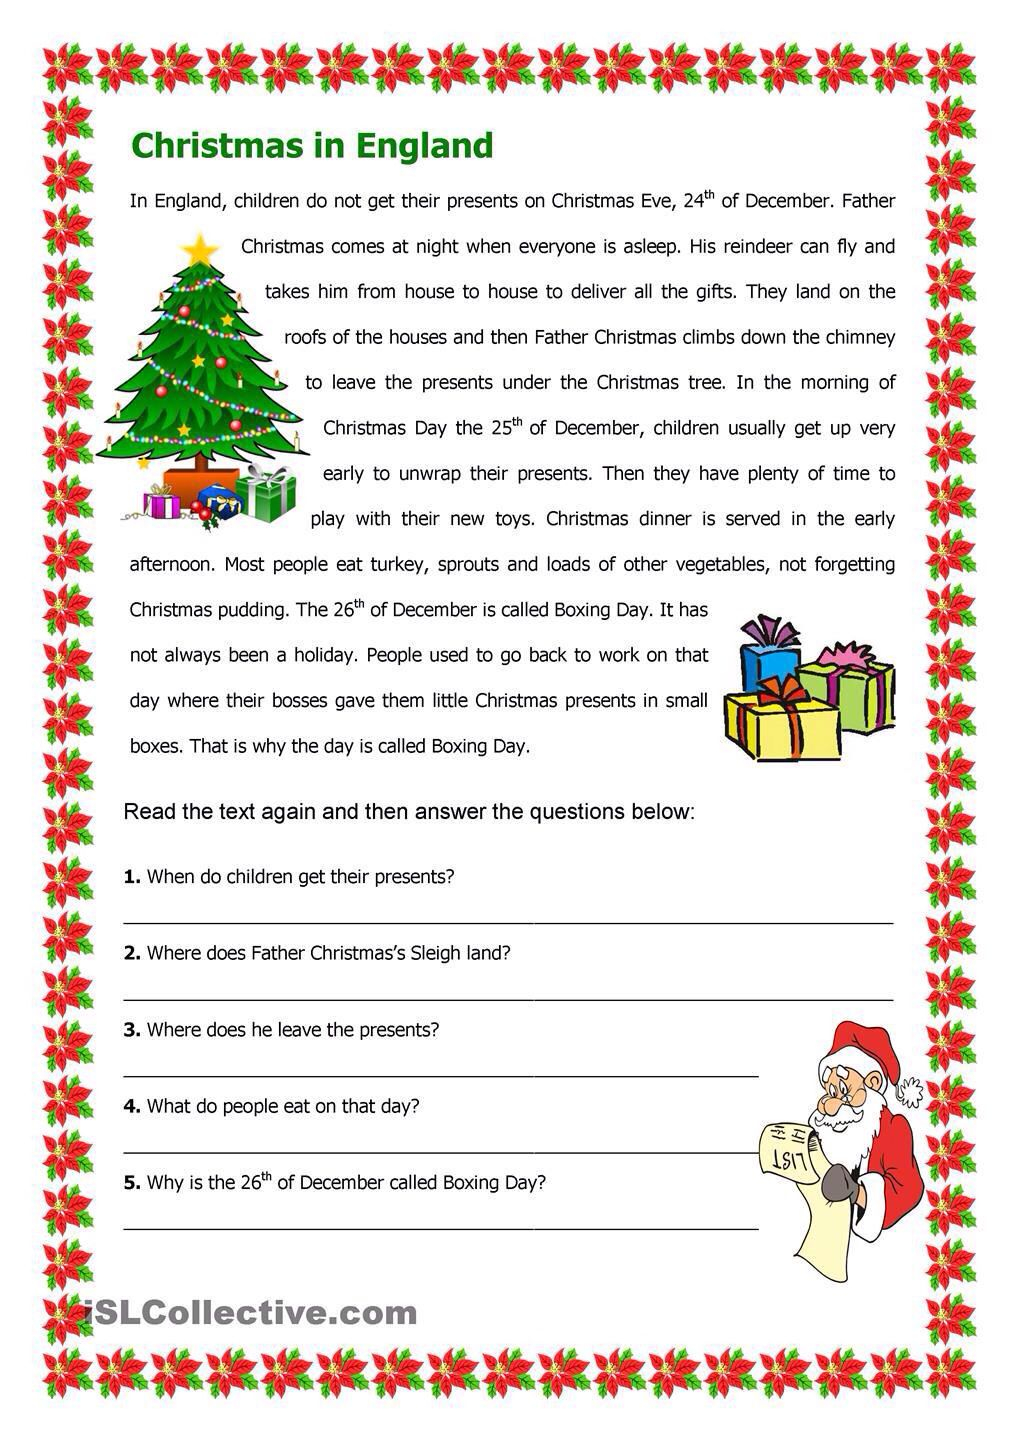 english-for-kids-step-by-step-reading-comprehension-worksheets-drago